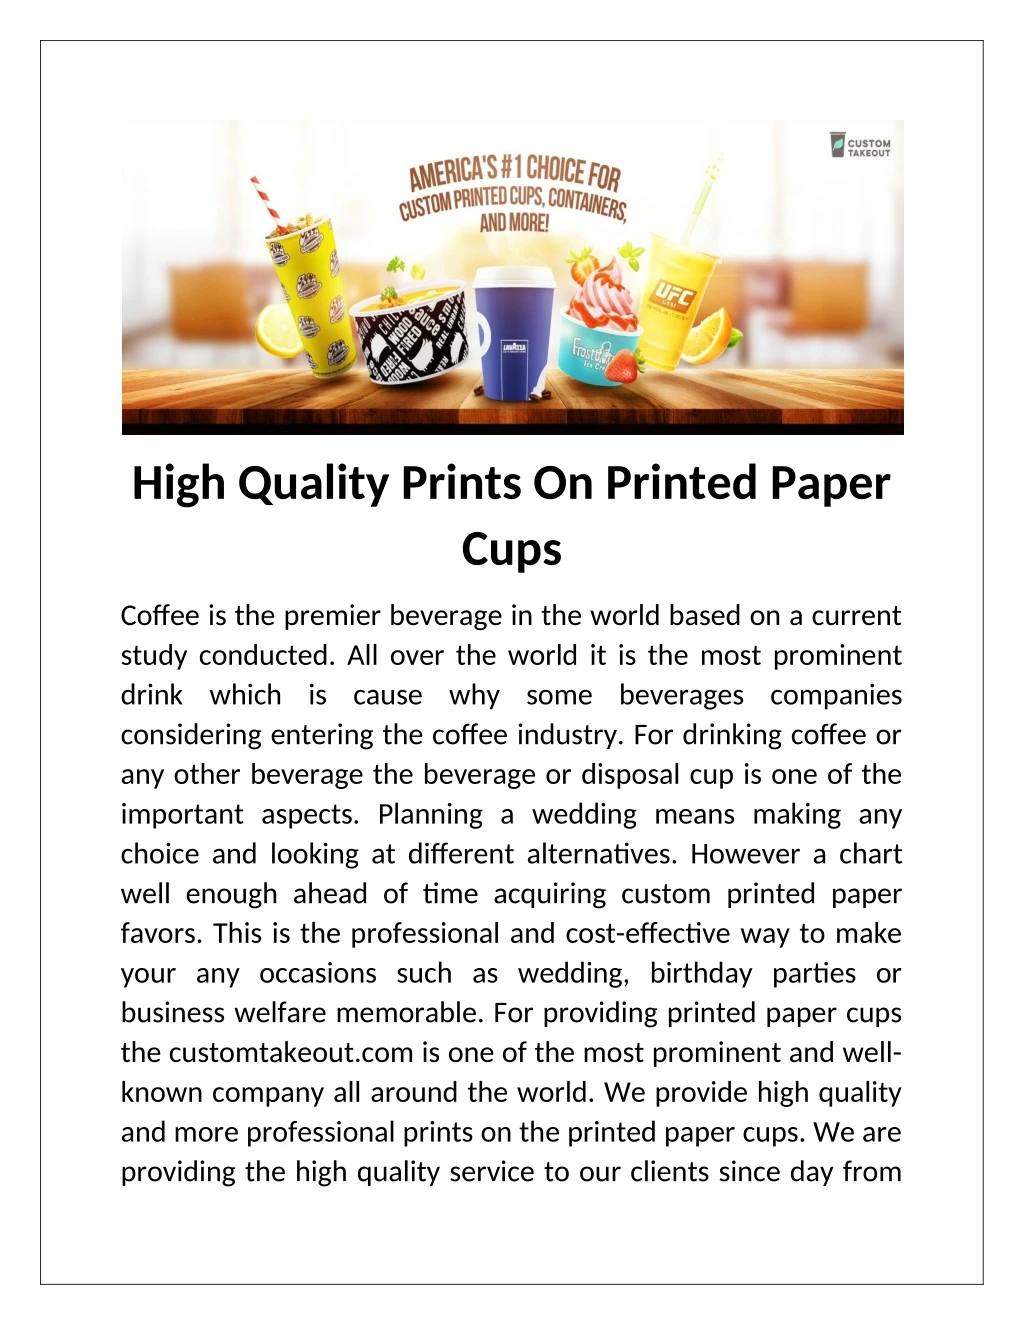 high quality prints on printed paper cups